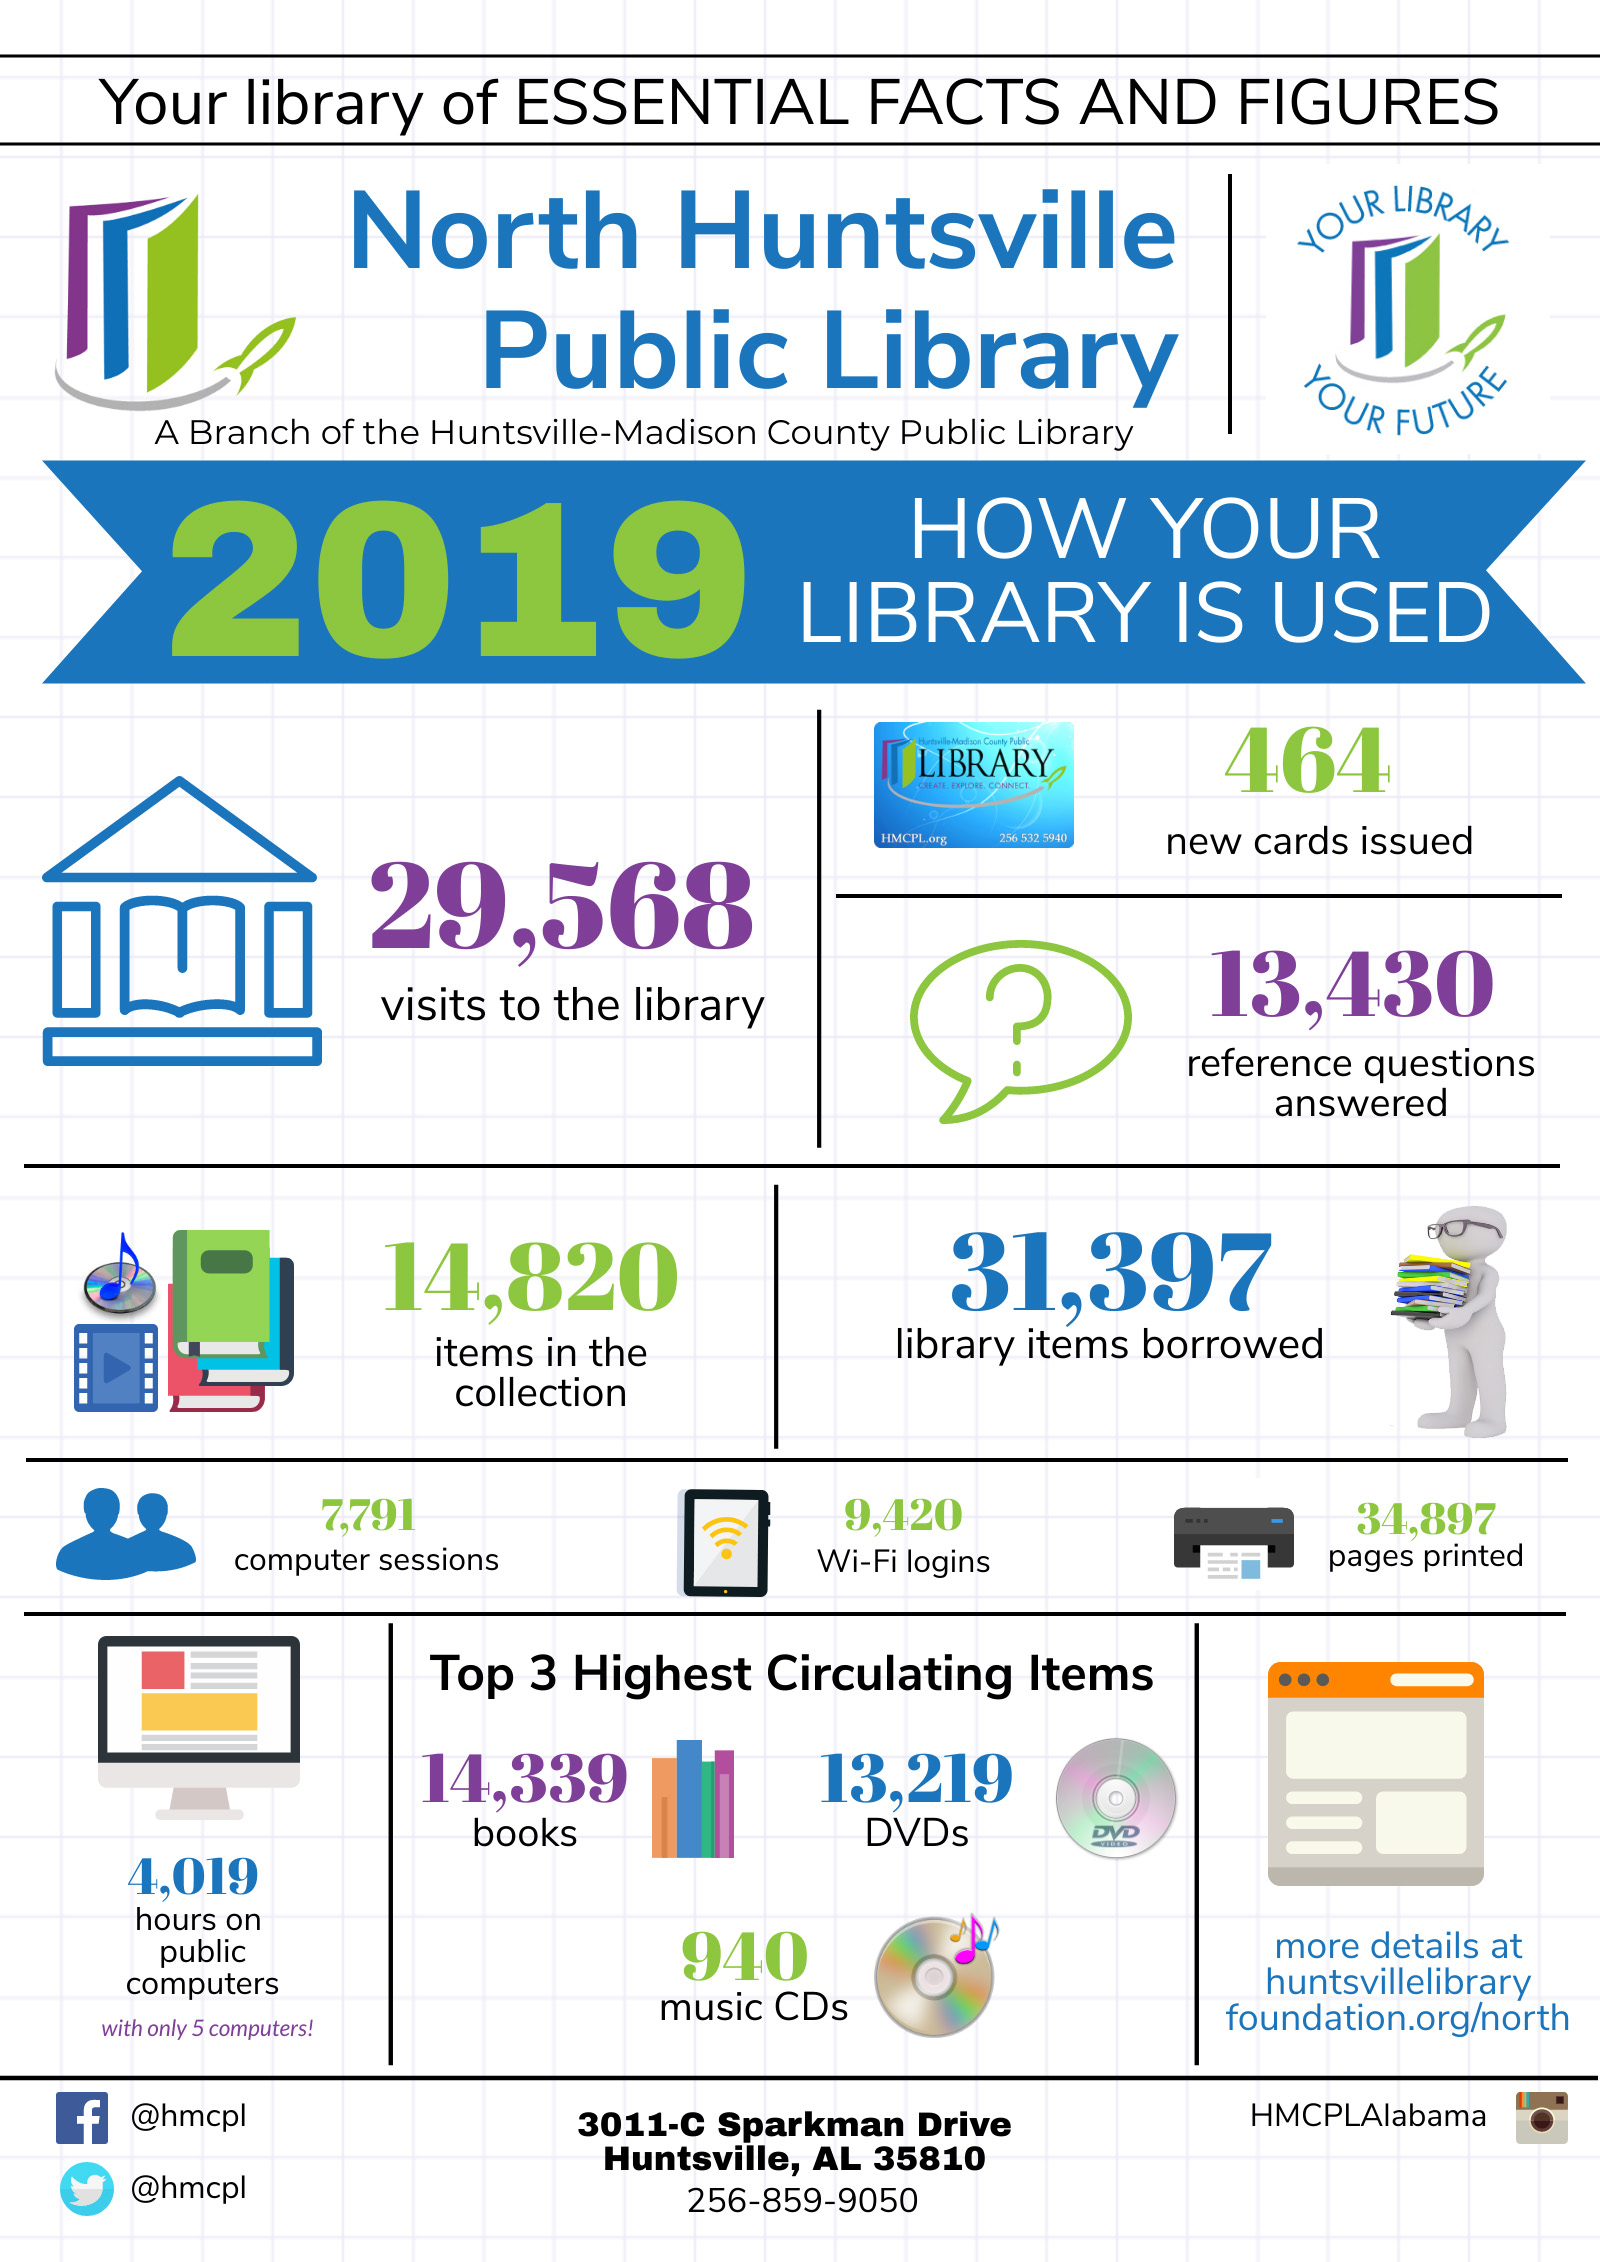 Graphic showing facts and statistics about the high usage of the current North Huntsville Public Library